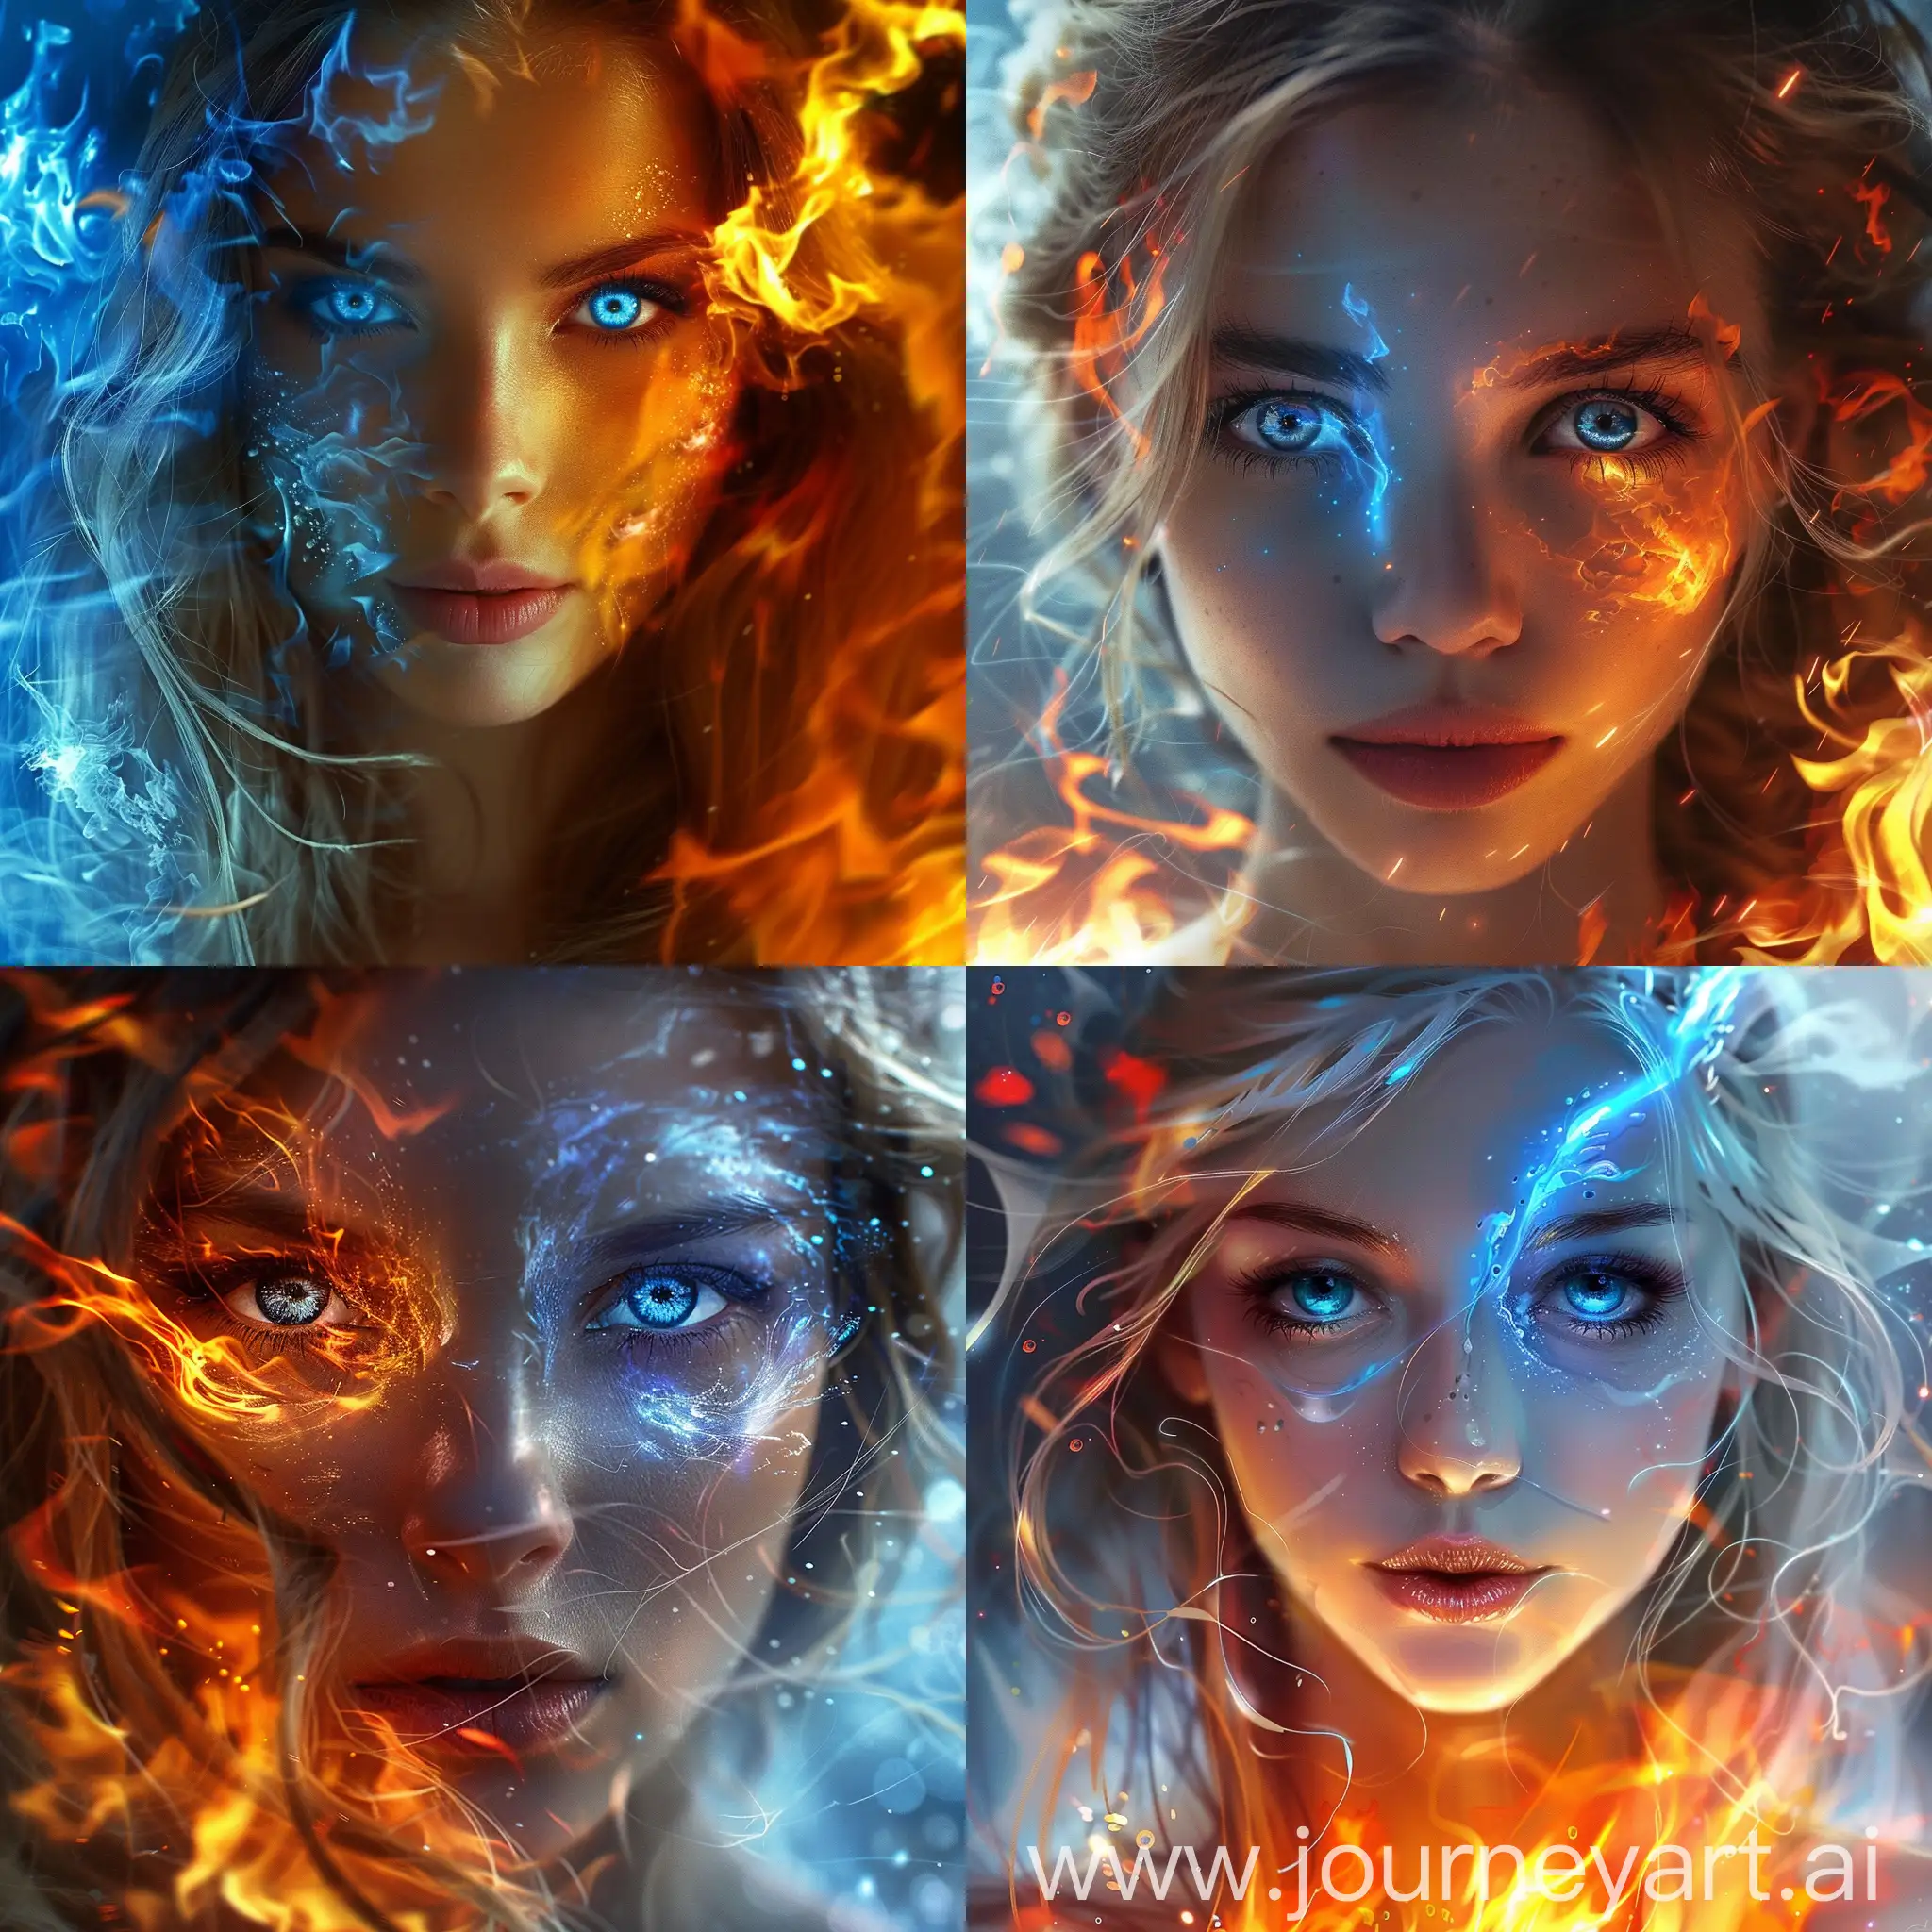 Stunning-Portrait-of-a-Girl-Embracing-Fire-and-Ice-with-Mesmerizing-Blue-Eyes